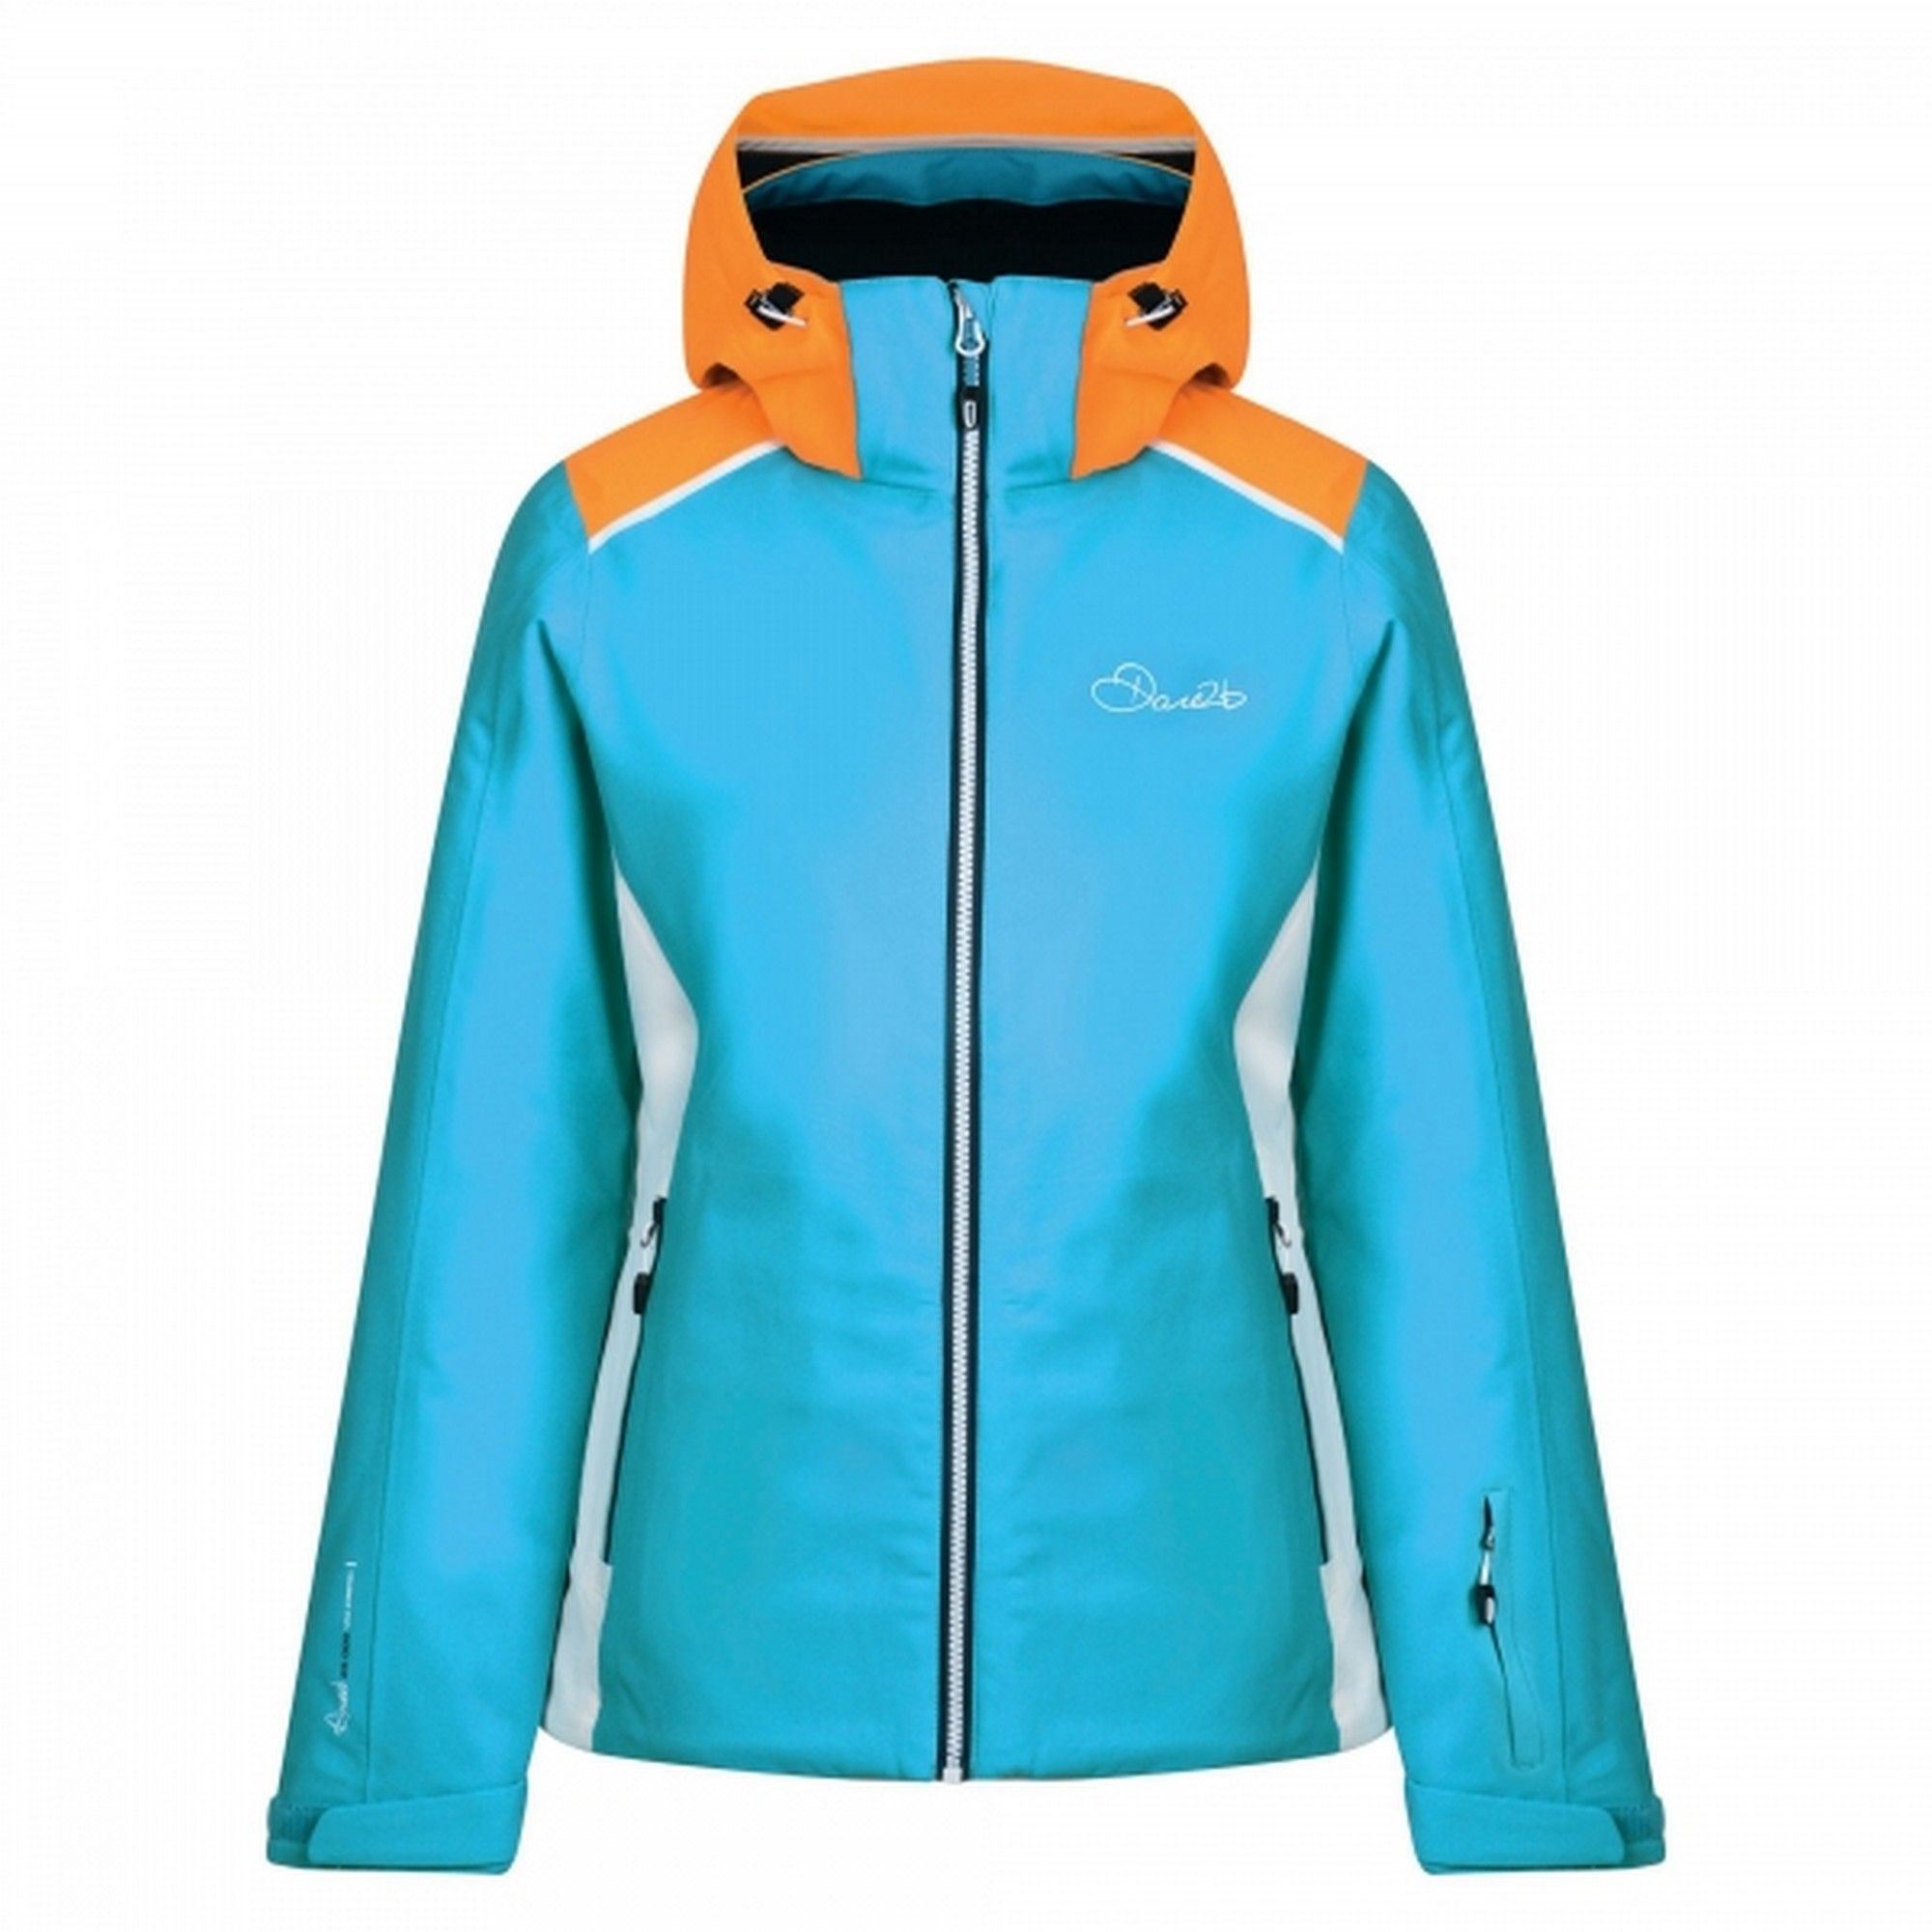 Womens jacket made of Ared V02 20000 Polyester 4-way stretch fabric. Waterproof and breathable with water repellent finish. Taped seams. Fixed foldaway hood with adjusters. Articulated sleeve design. 2 x lower zip pockets. 1 x ski pass zip pocket. Adjustable cuffs. Adjustable shockcord hem system. High loft Polyester insulation. Polyester lining with scrim back panel. Fixed snowskirt with gel gripper tape. 2 x internal mesh pockets incl. lens wipe cloth. Ideal for wearing outdoors on a cold day. 100% Polyester.